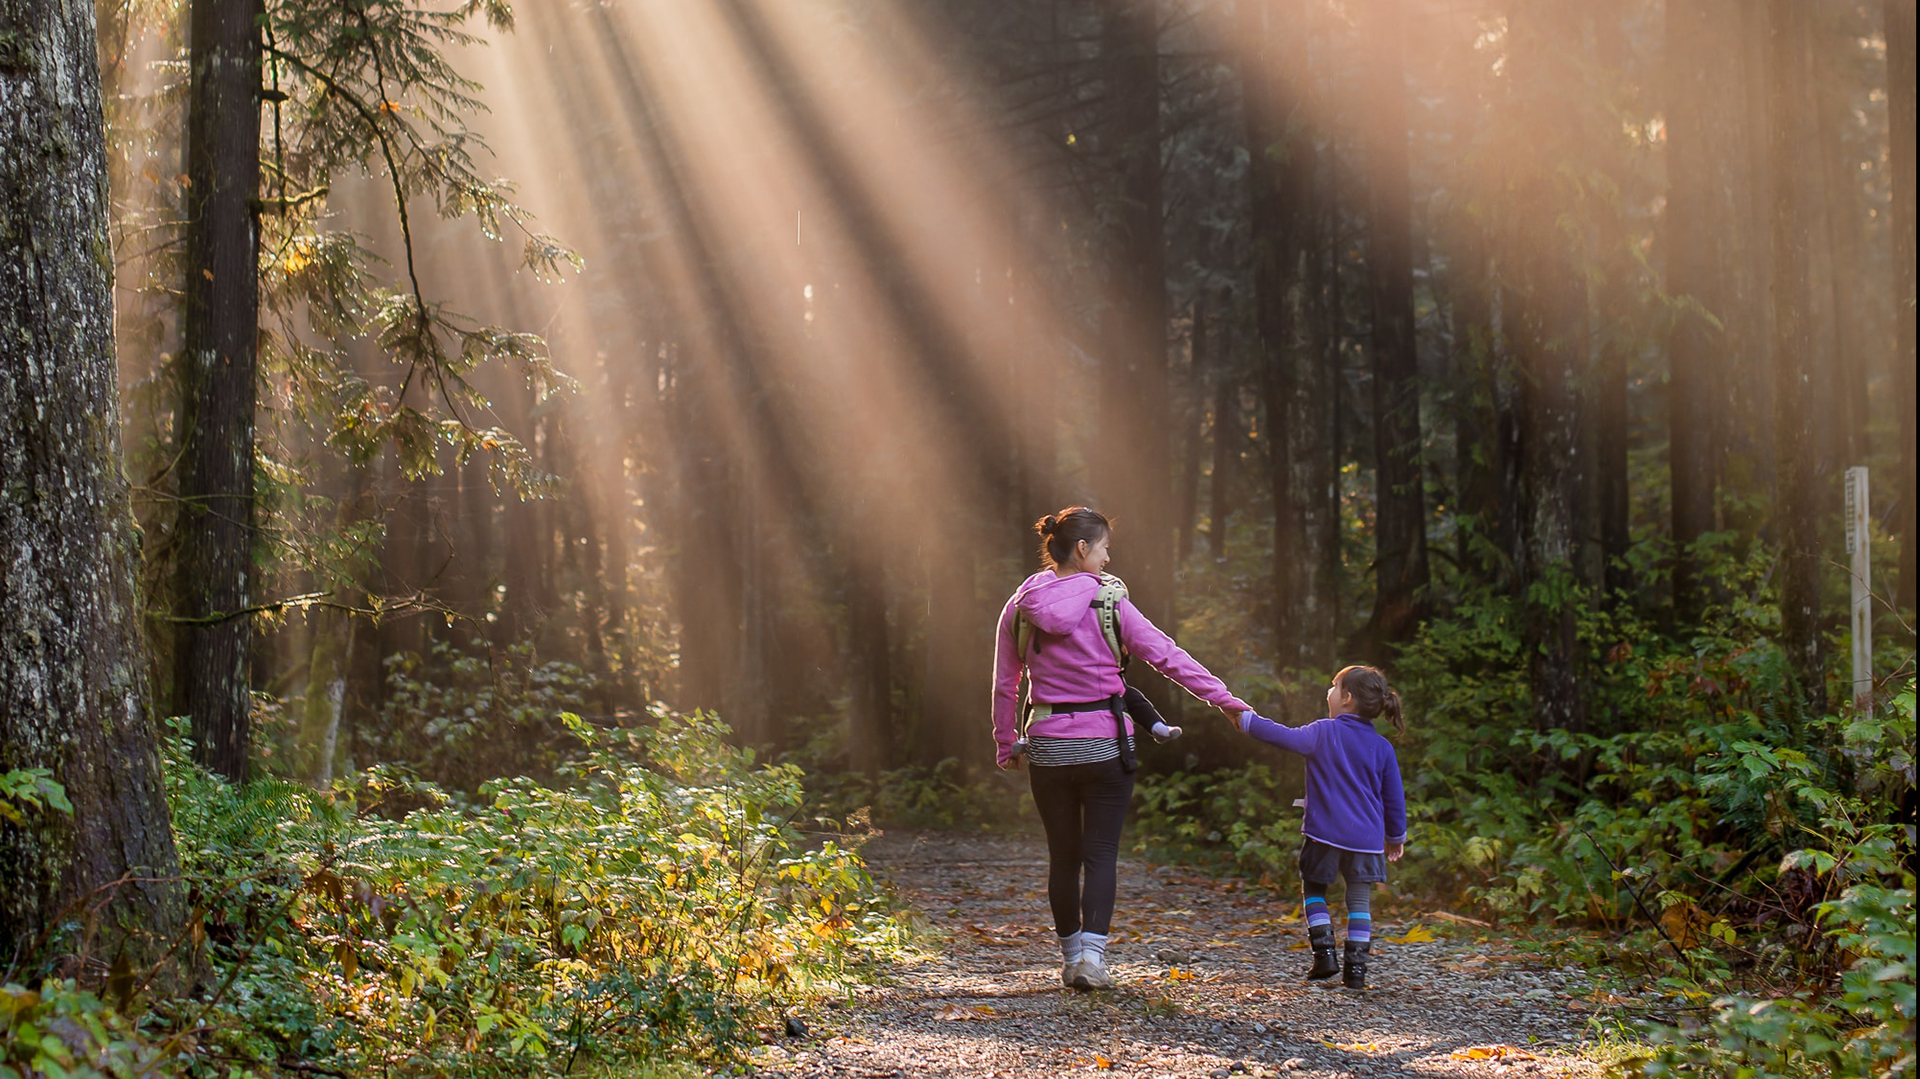 RAF-woman-and-child-walking-in-the-forest-web.jpg